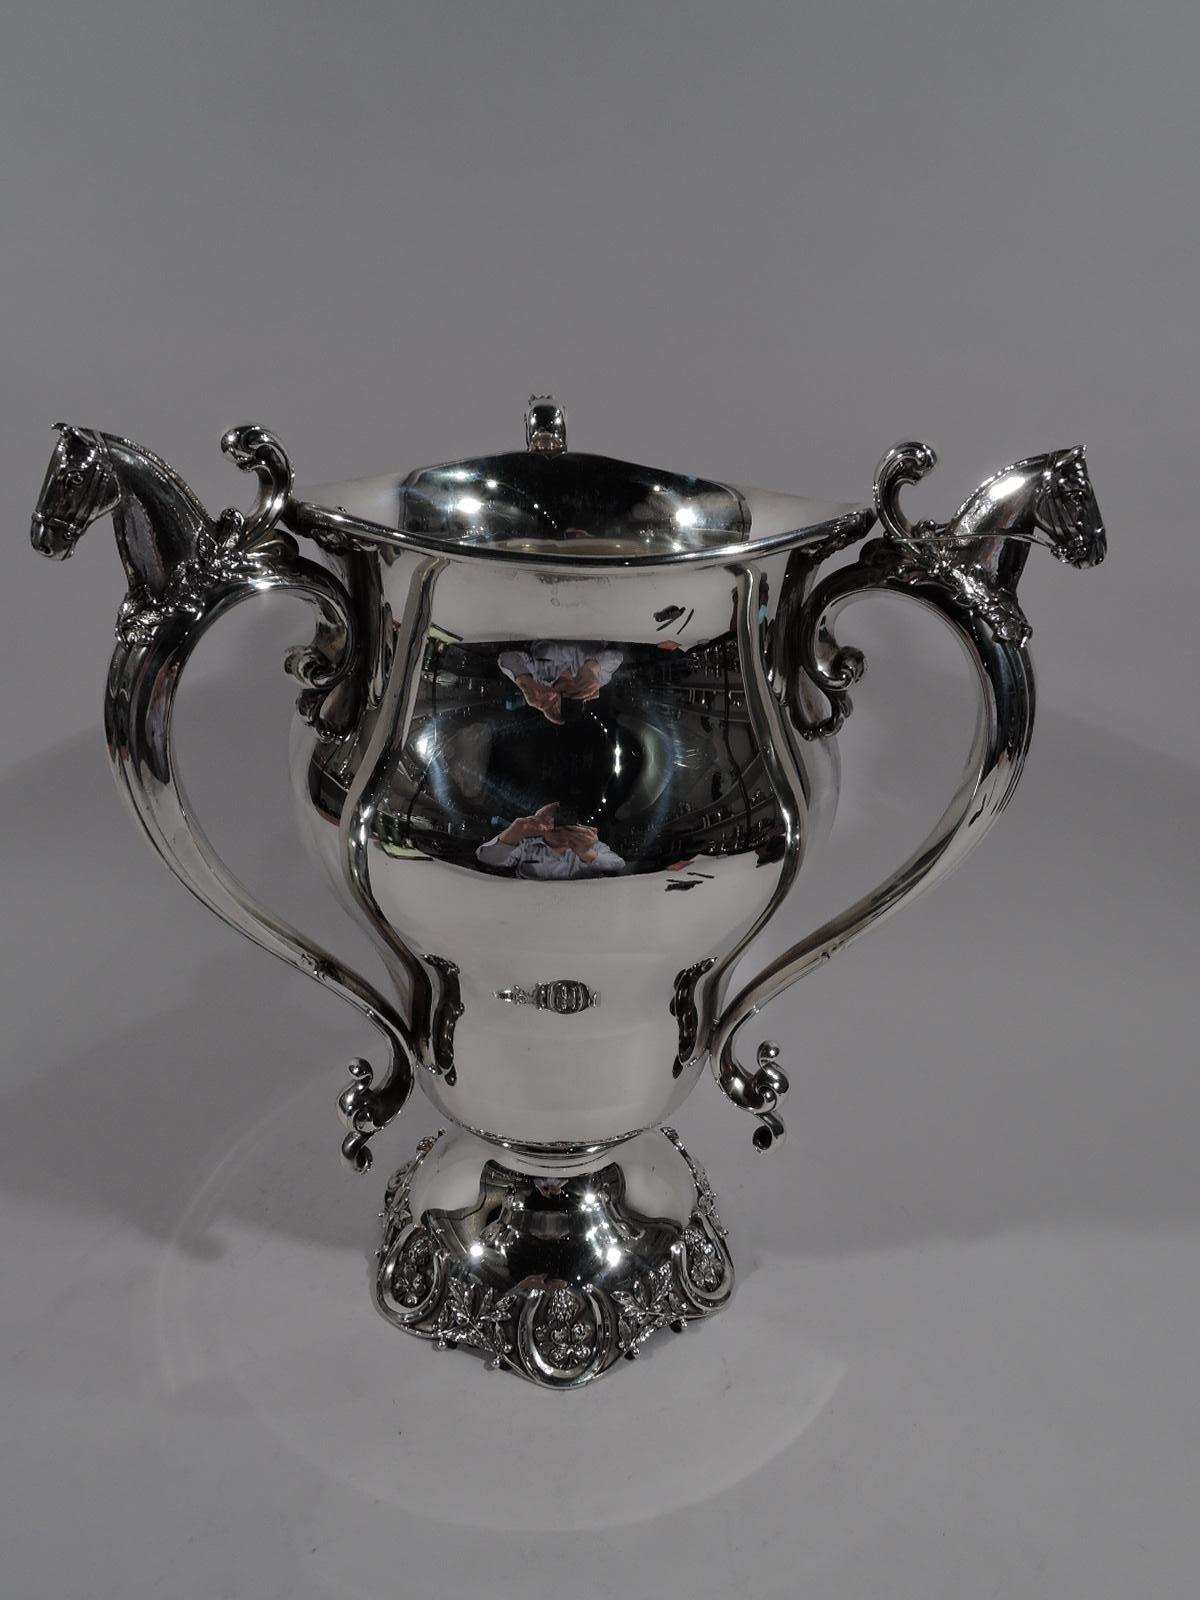 Turn-of-the-century American sterling silver loving cup trophy. Baluster with three scroll handles, each capped with cast horse bust encircled with wreath. Domed foot applied with leafing berry branches alternating with flowers set in horseshoes. On